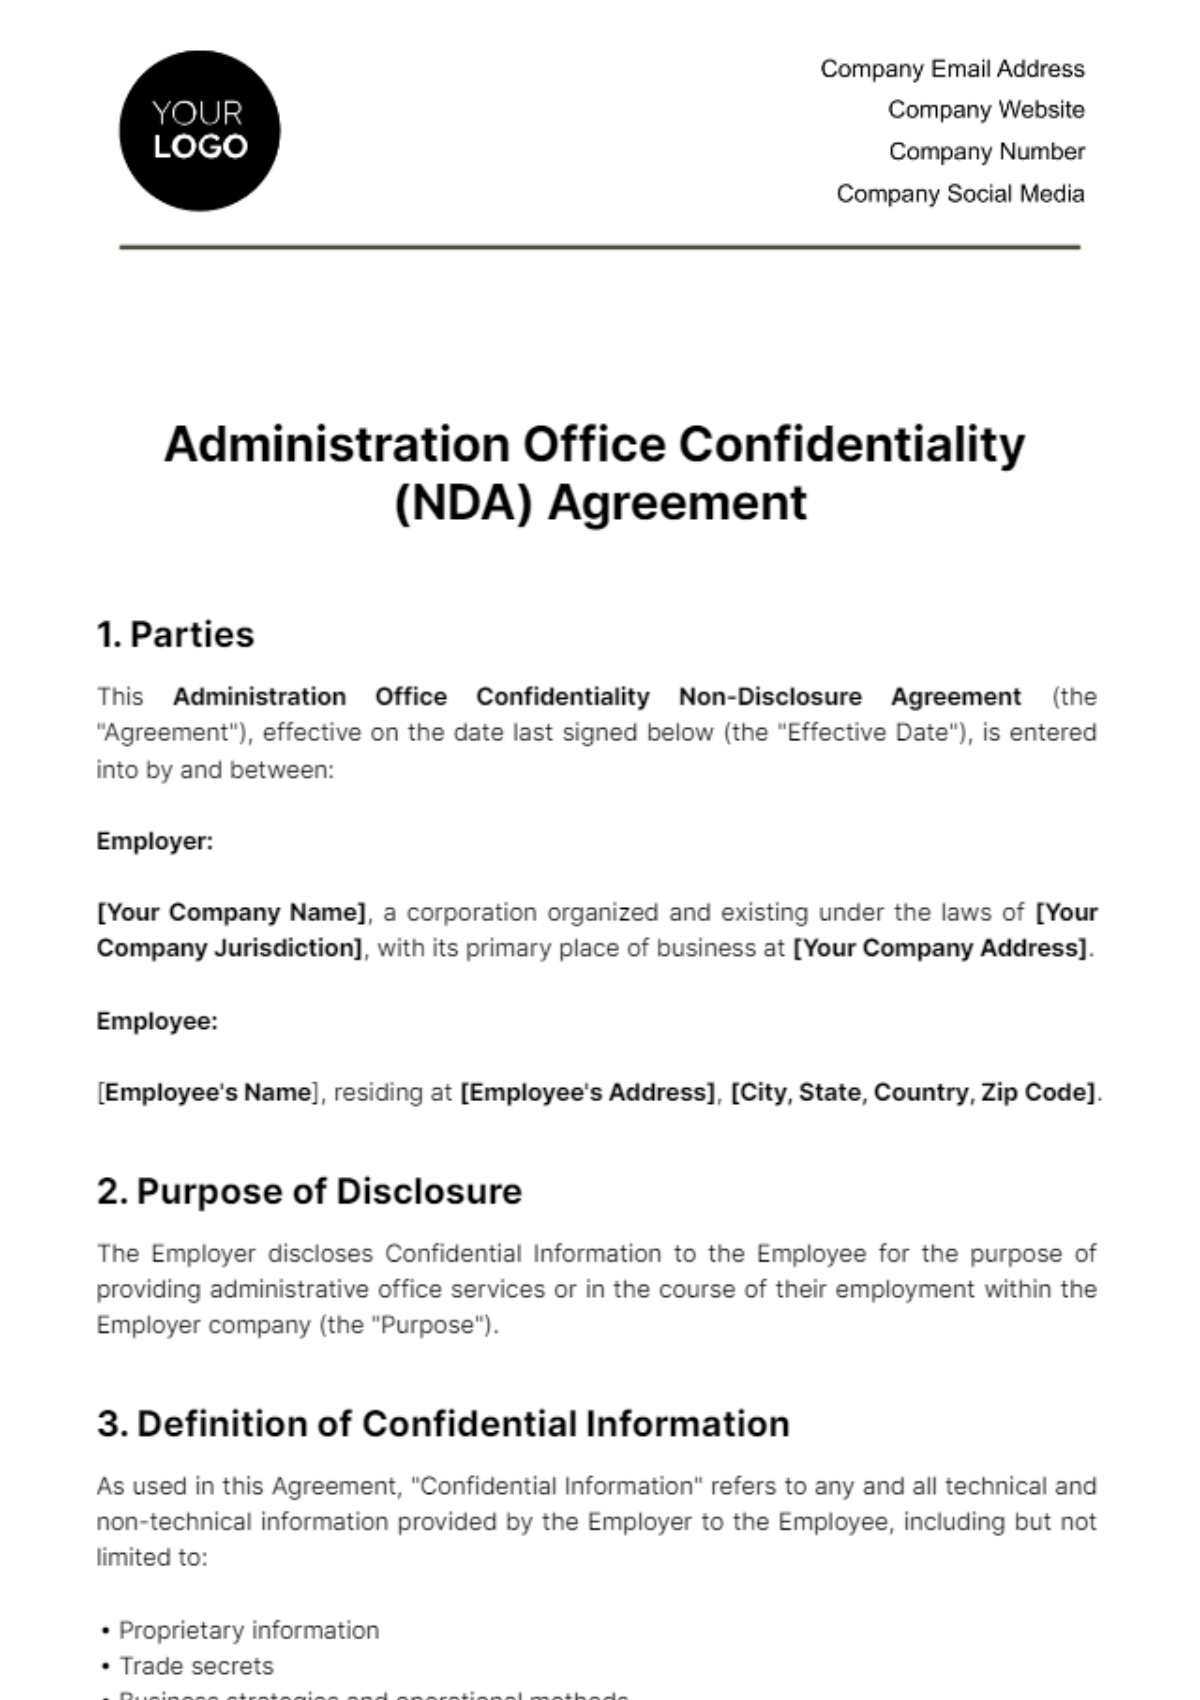 Free Administration Office Confidentiality (NDA) Agreement Template